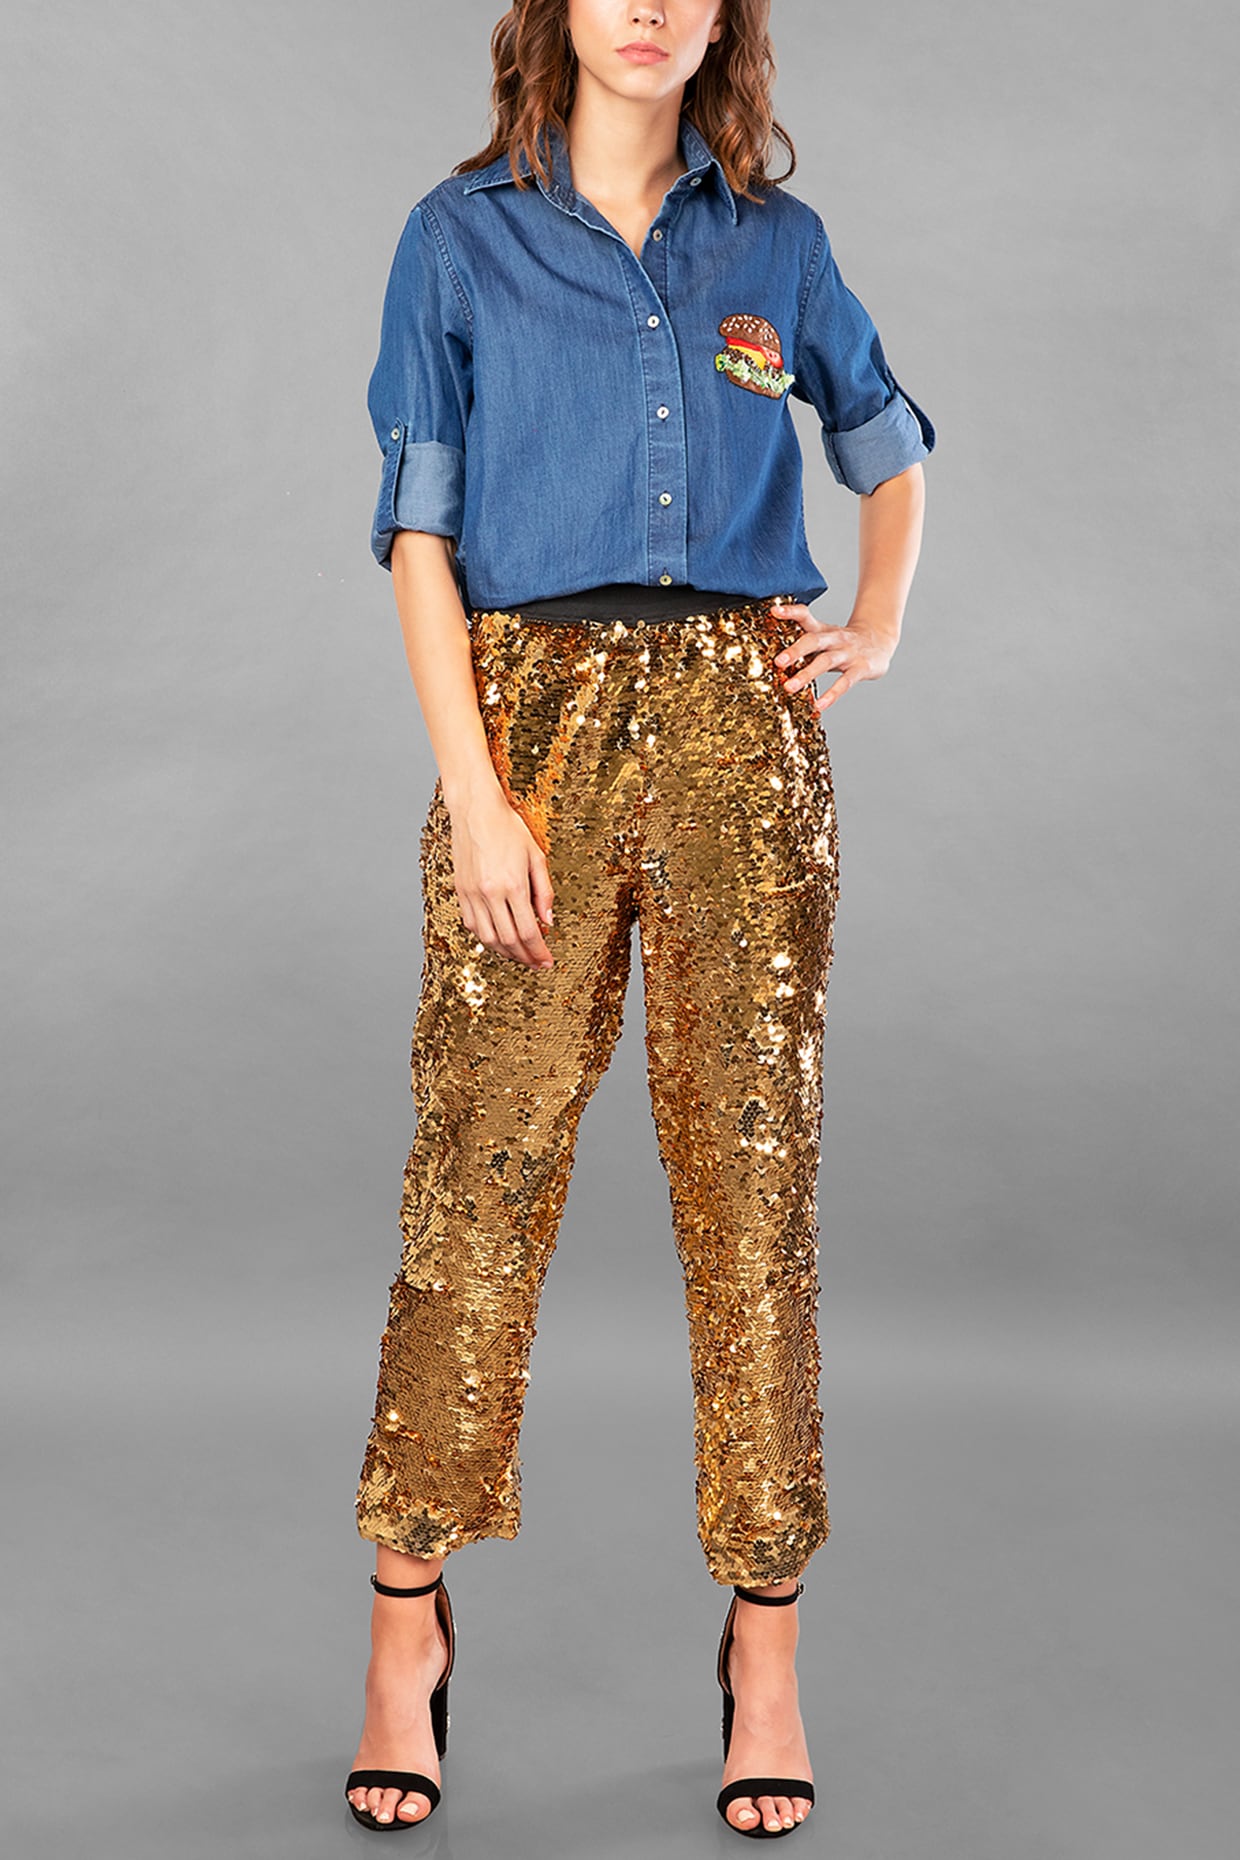 Champagne Sequin Pants  High Waisted Pants  Sequin Trousers  Lulus